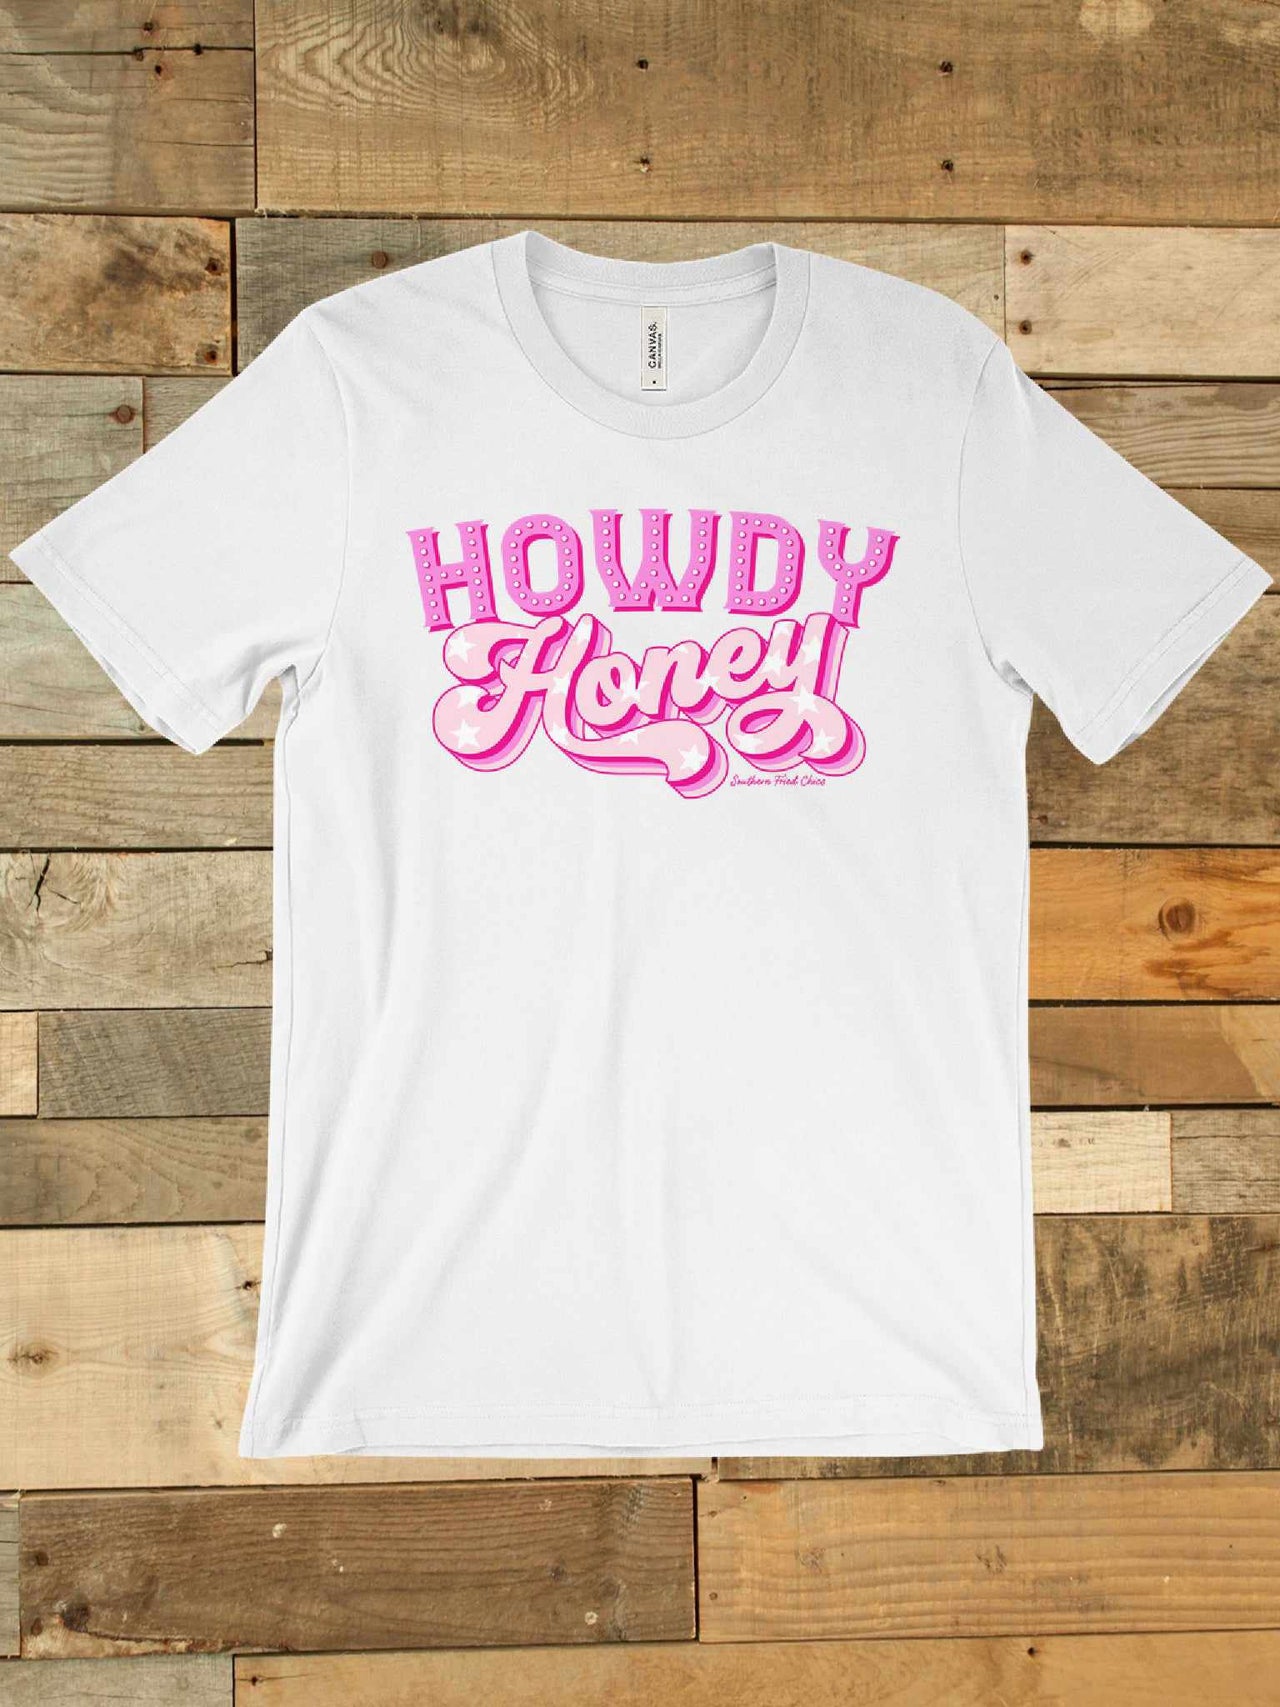 Funny graphic tee for women "Howdy Honey".